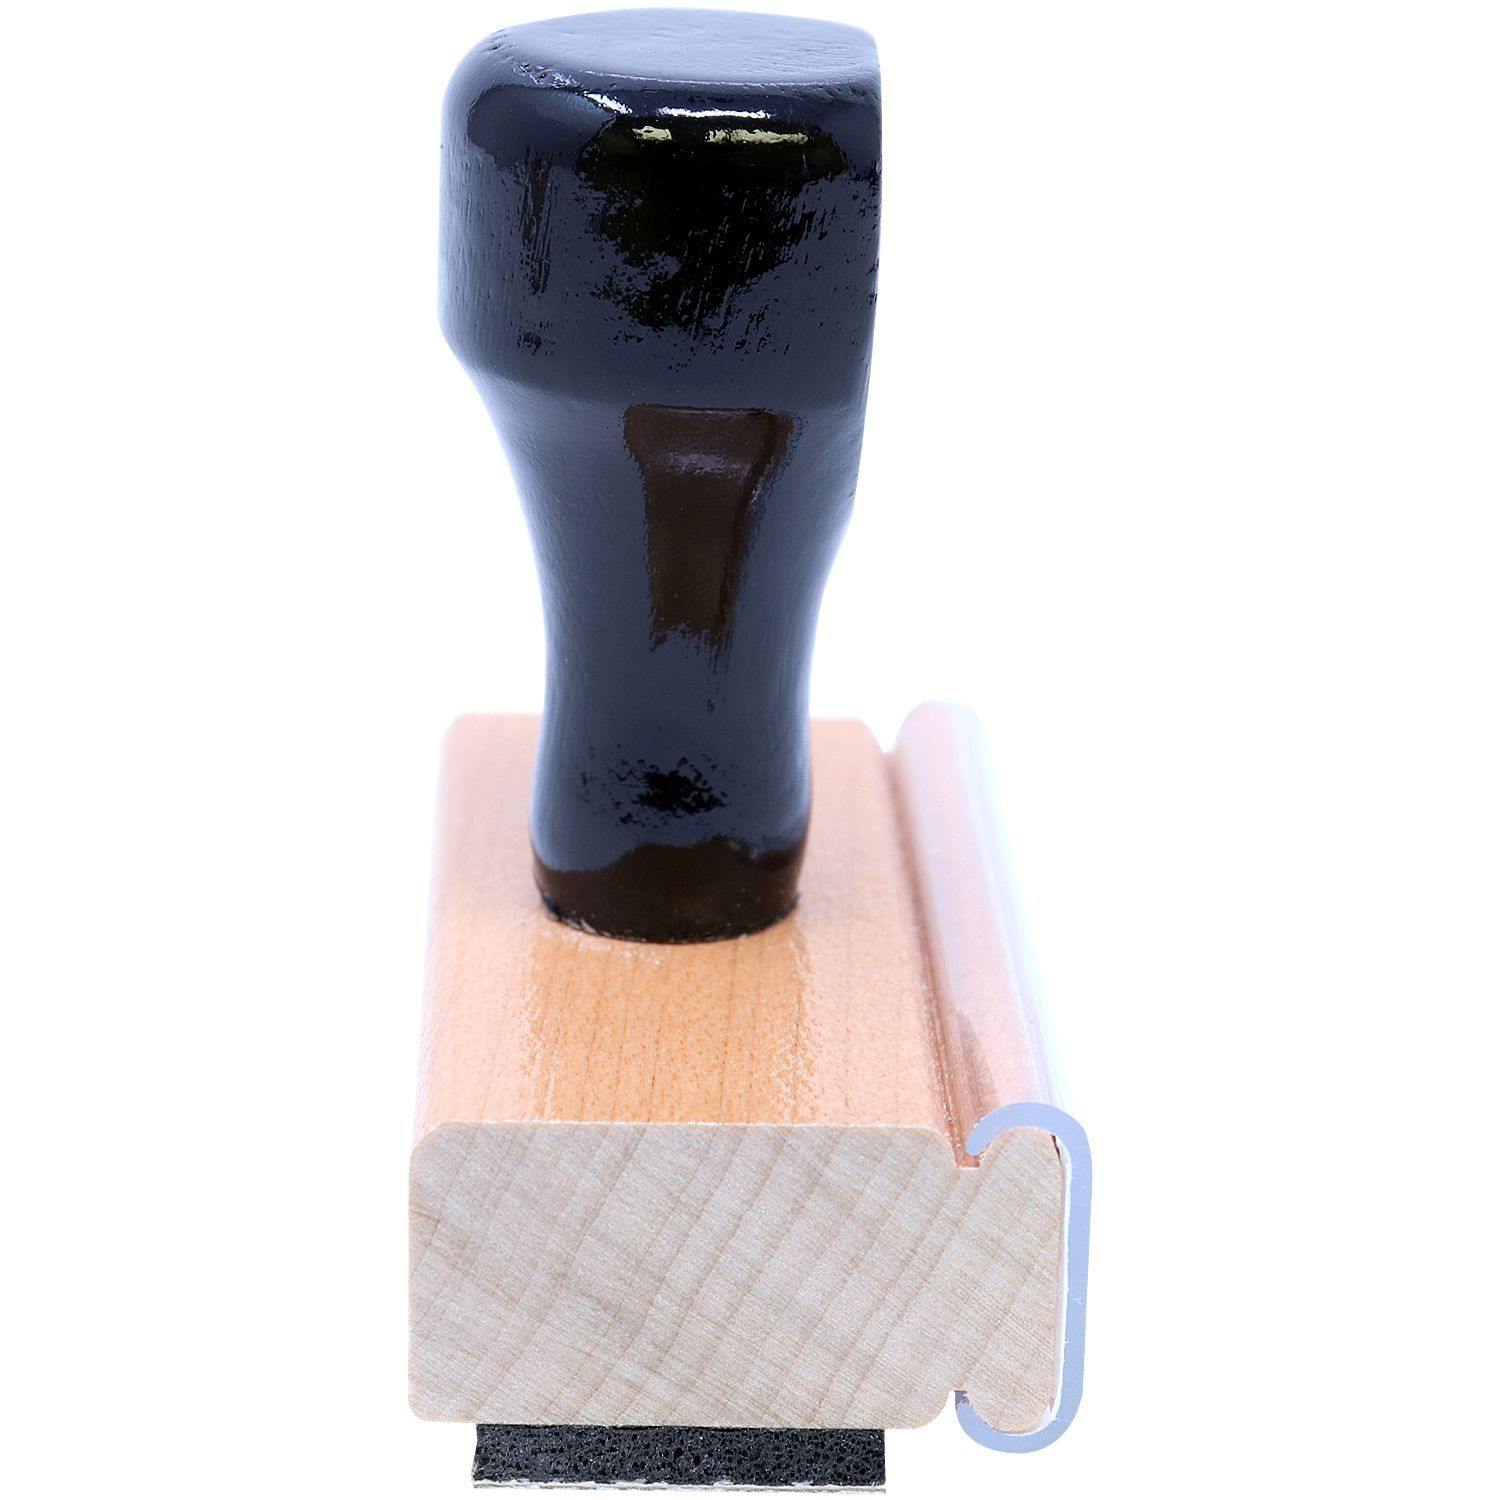 Large Special Standard Mail Rubber Stamp - Engineer Seal Stamps - Brand_Acorn, Impression Size_Large, Stamp Type_Regular Stamp, Type of Use_Postal & Mailing, Type of Use_Shipping & Receiving